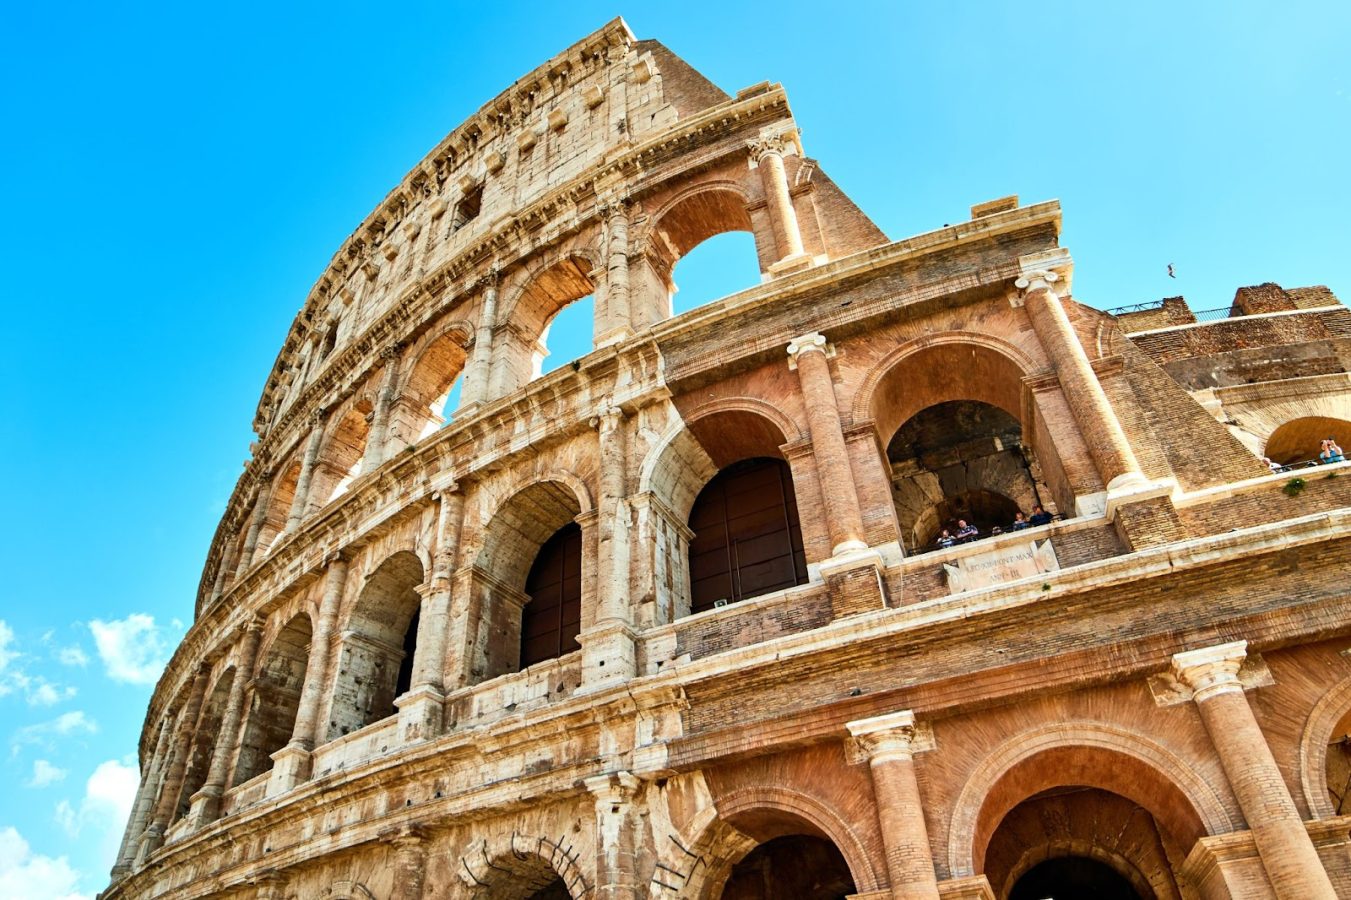 Closeup, upward view of the colosseum in Rome, Italy - the destination to travel to for Engineering and Architecture majors.